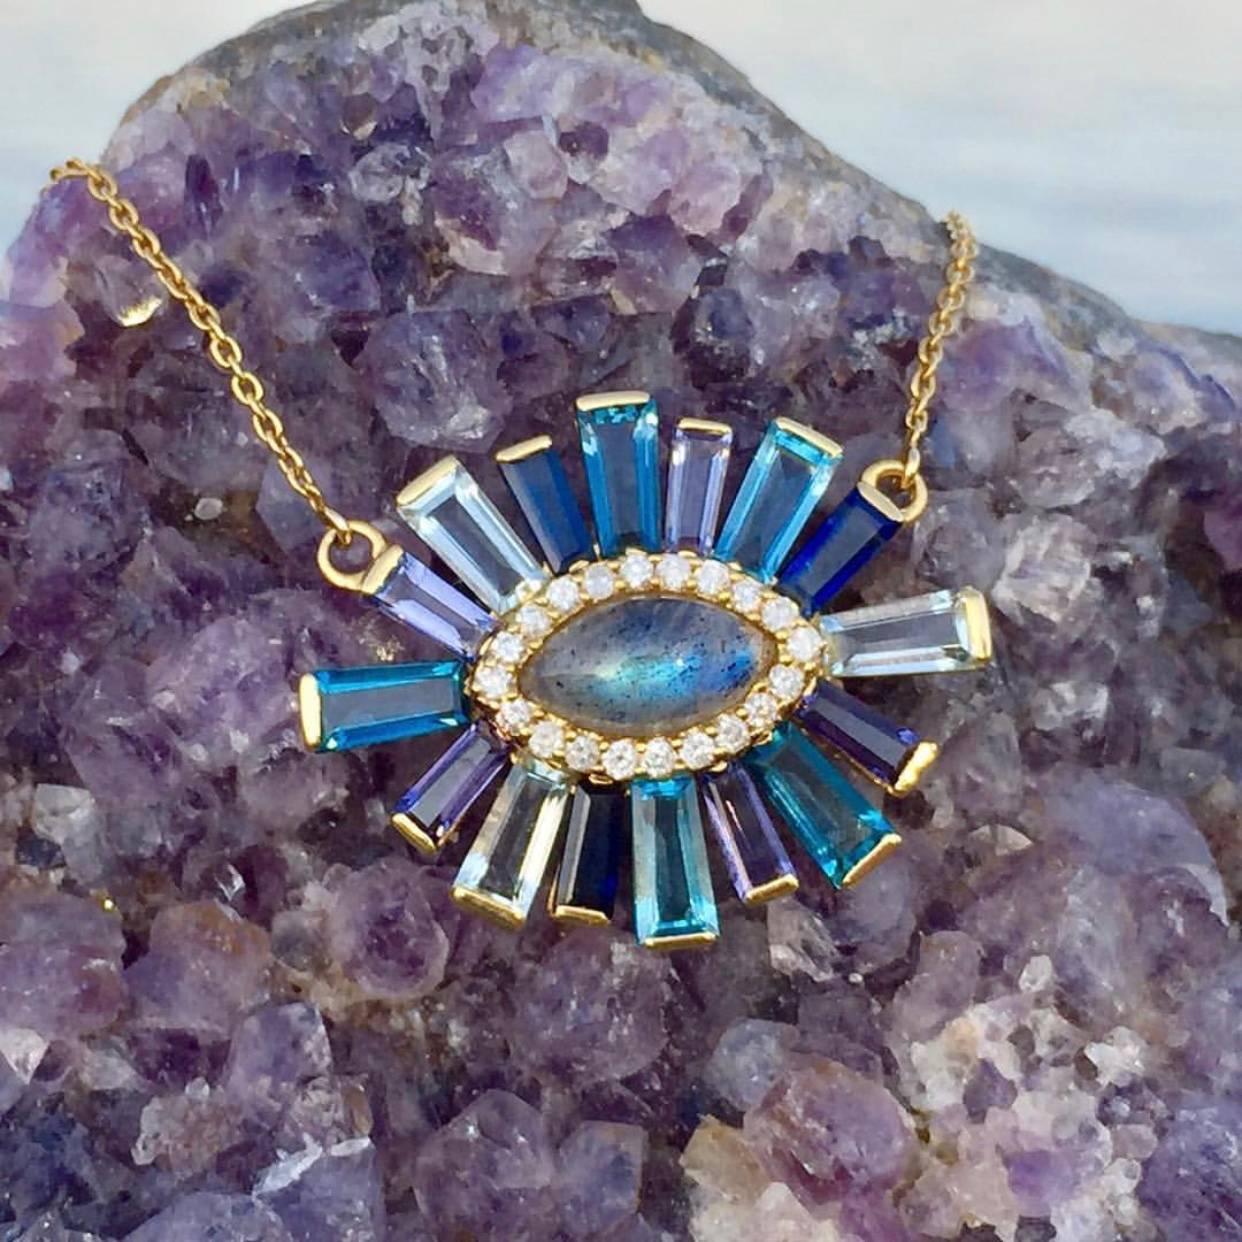 A marquise labradorite surrounded by a halo of diamonds radiated with a mix of aquamarine, iolite, sapphire, and tanzanite tapered baguettes.  Set in 18k yellow gold. 

Each piece of jewelry is handmade to order for you.  Production time is 4-6